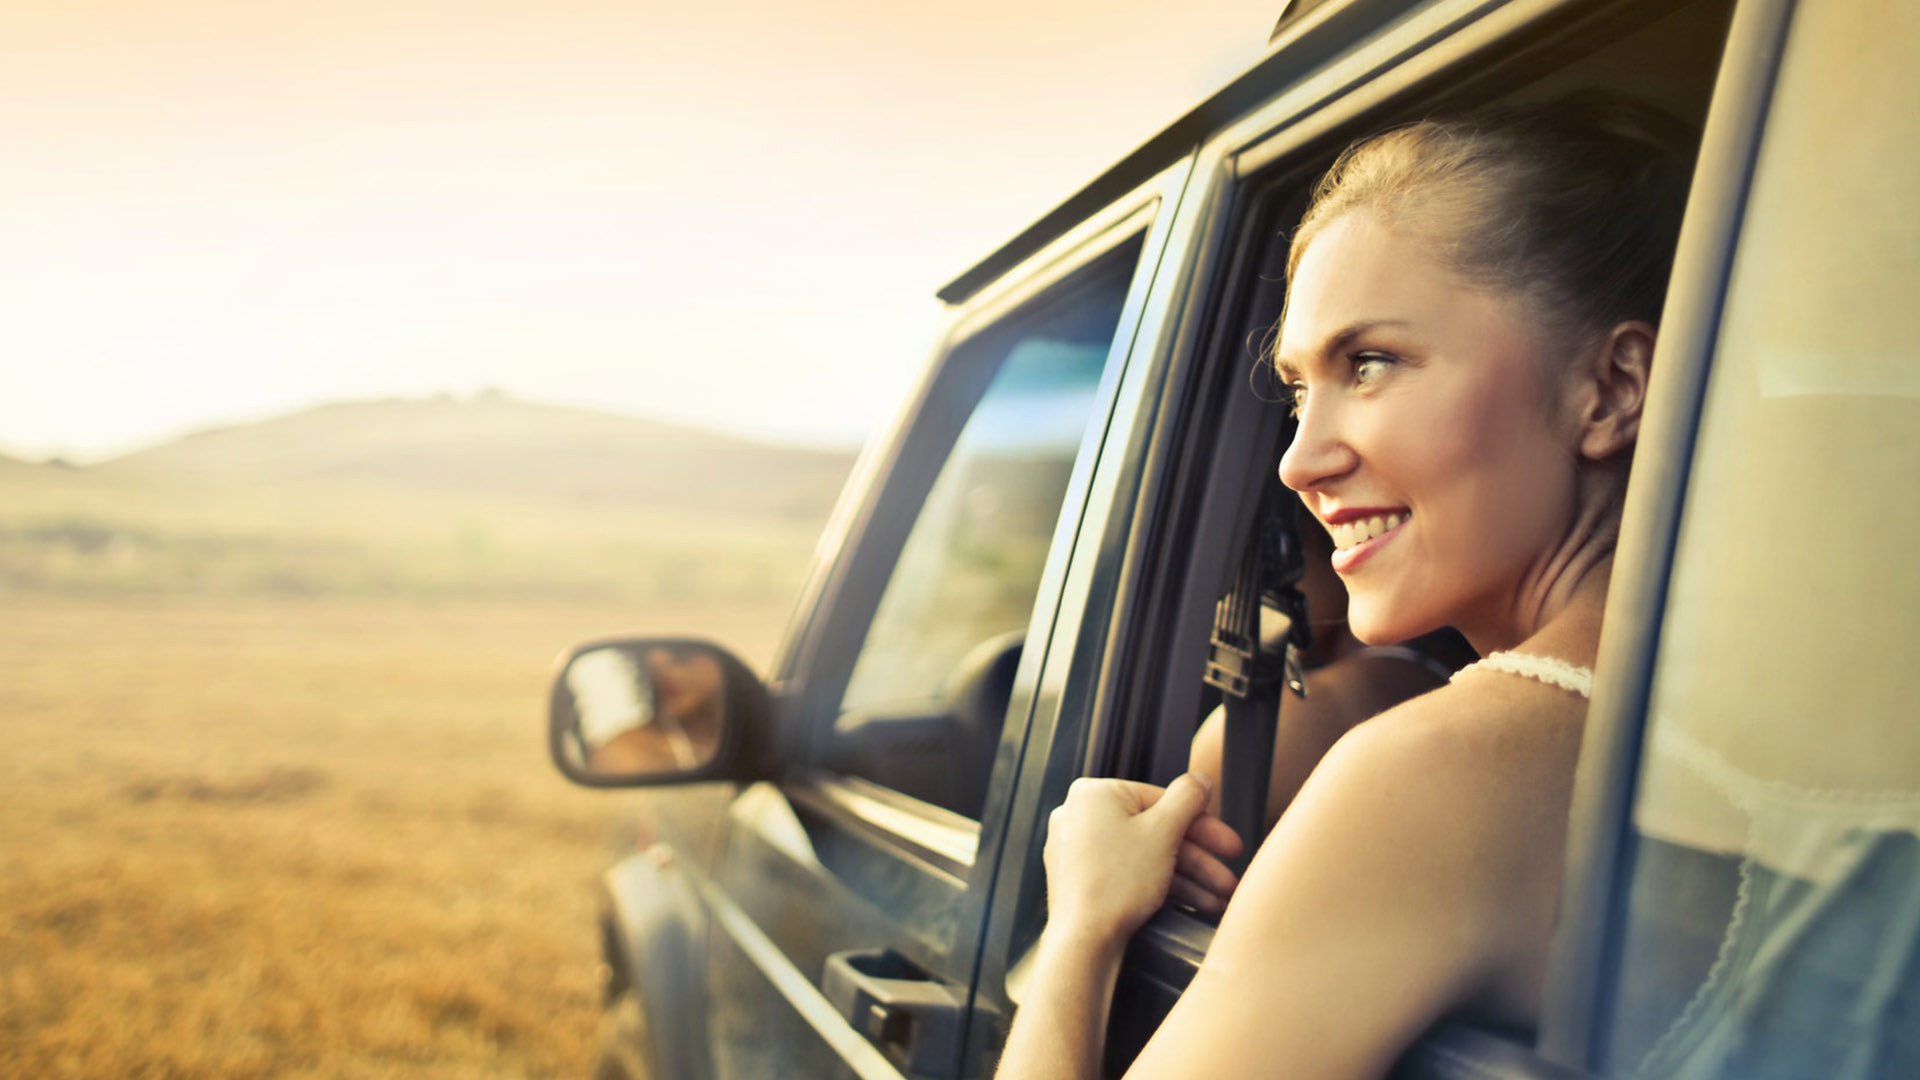 A person smiling looking out the window of a car in a rural landscape